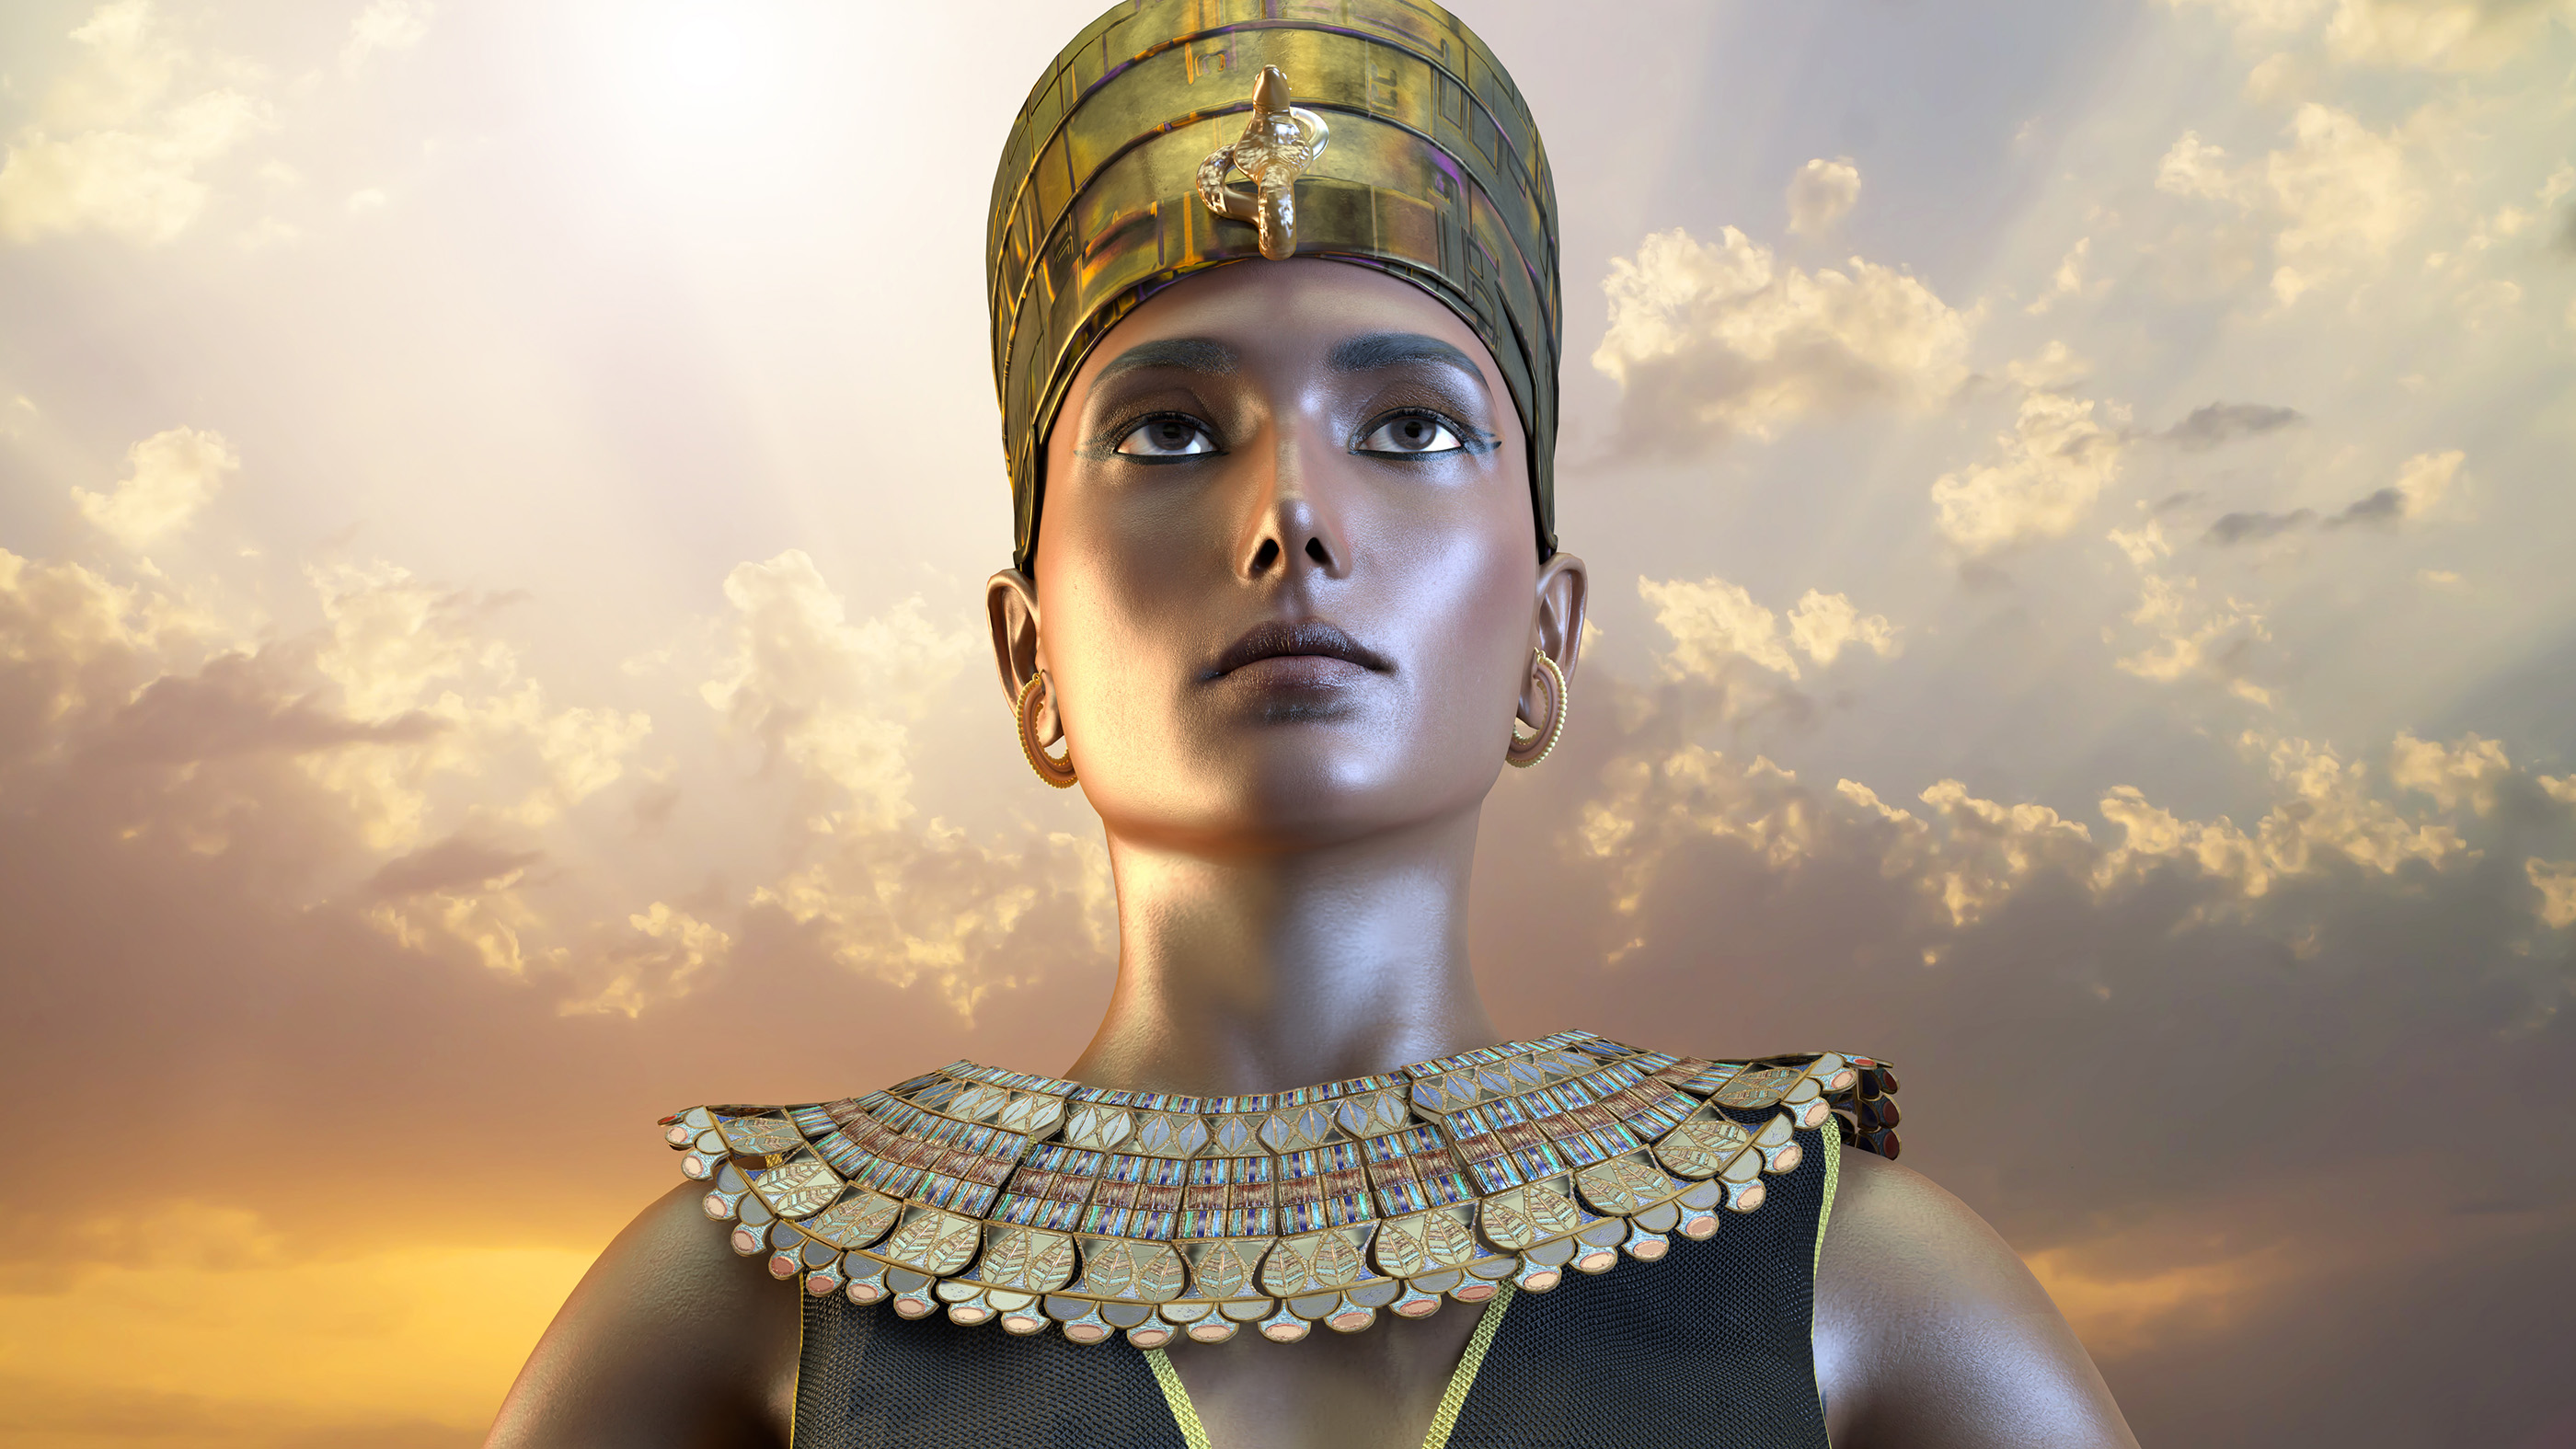 Here, a 3D rendering of Cleopatra, the last pharaoh of ancient Egypt.